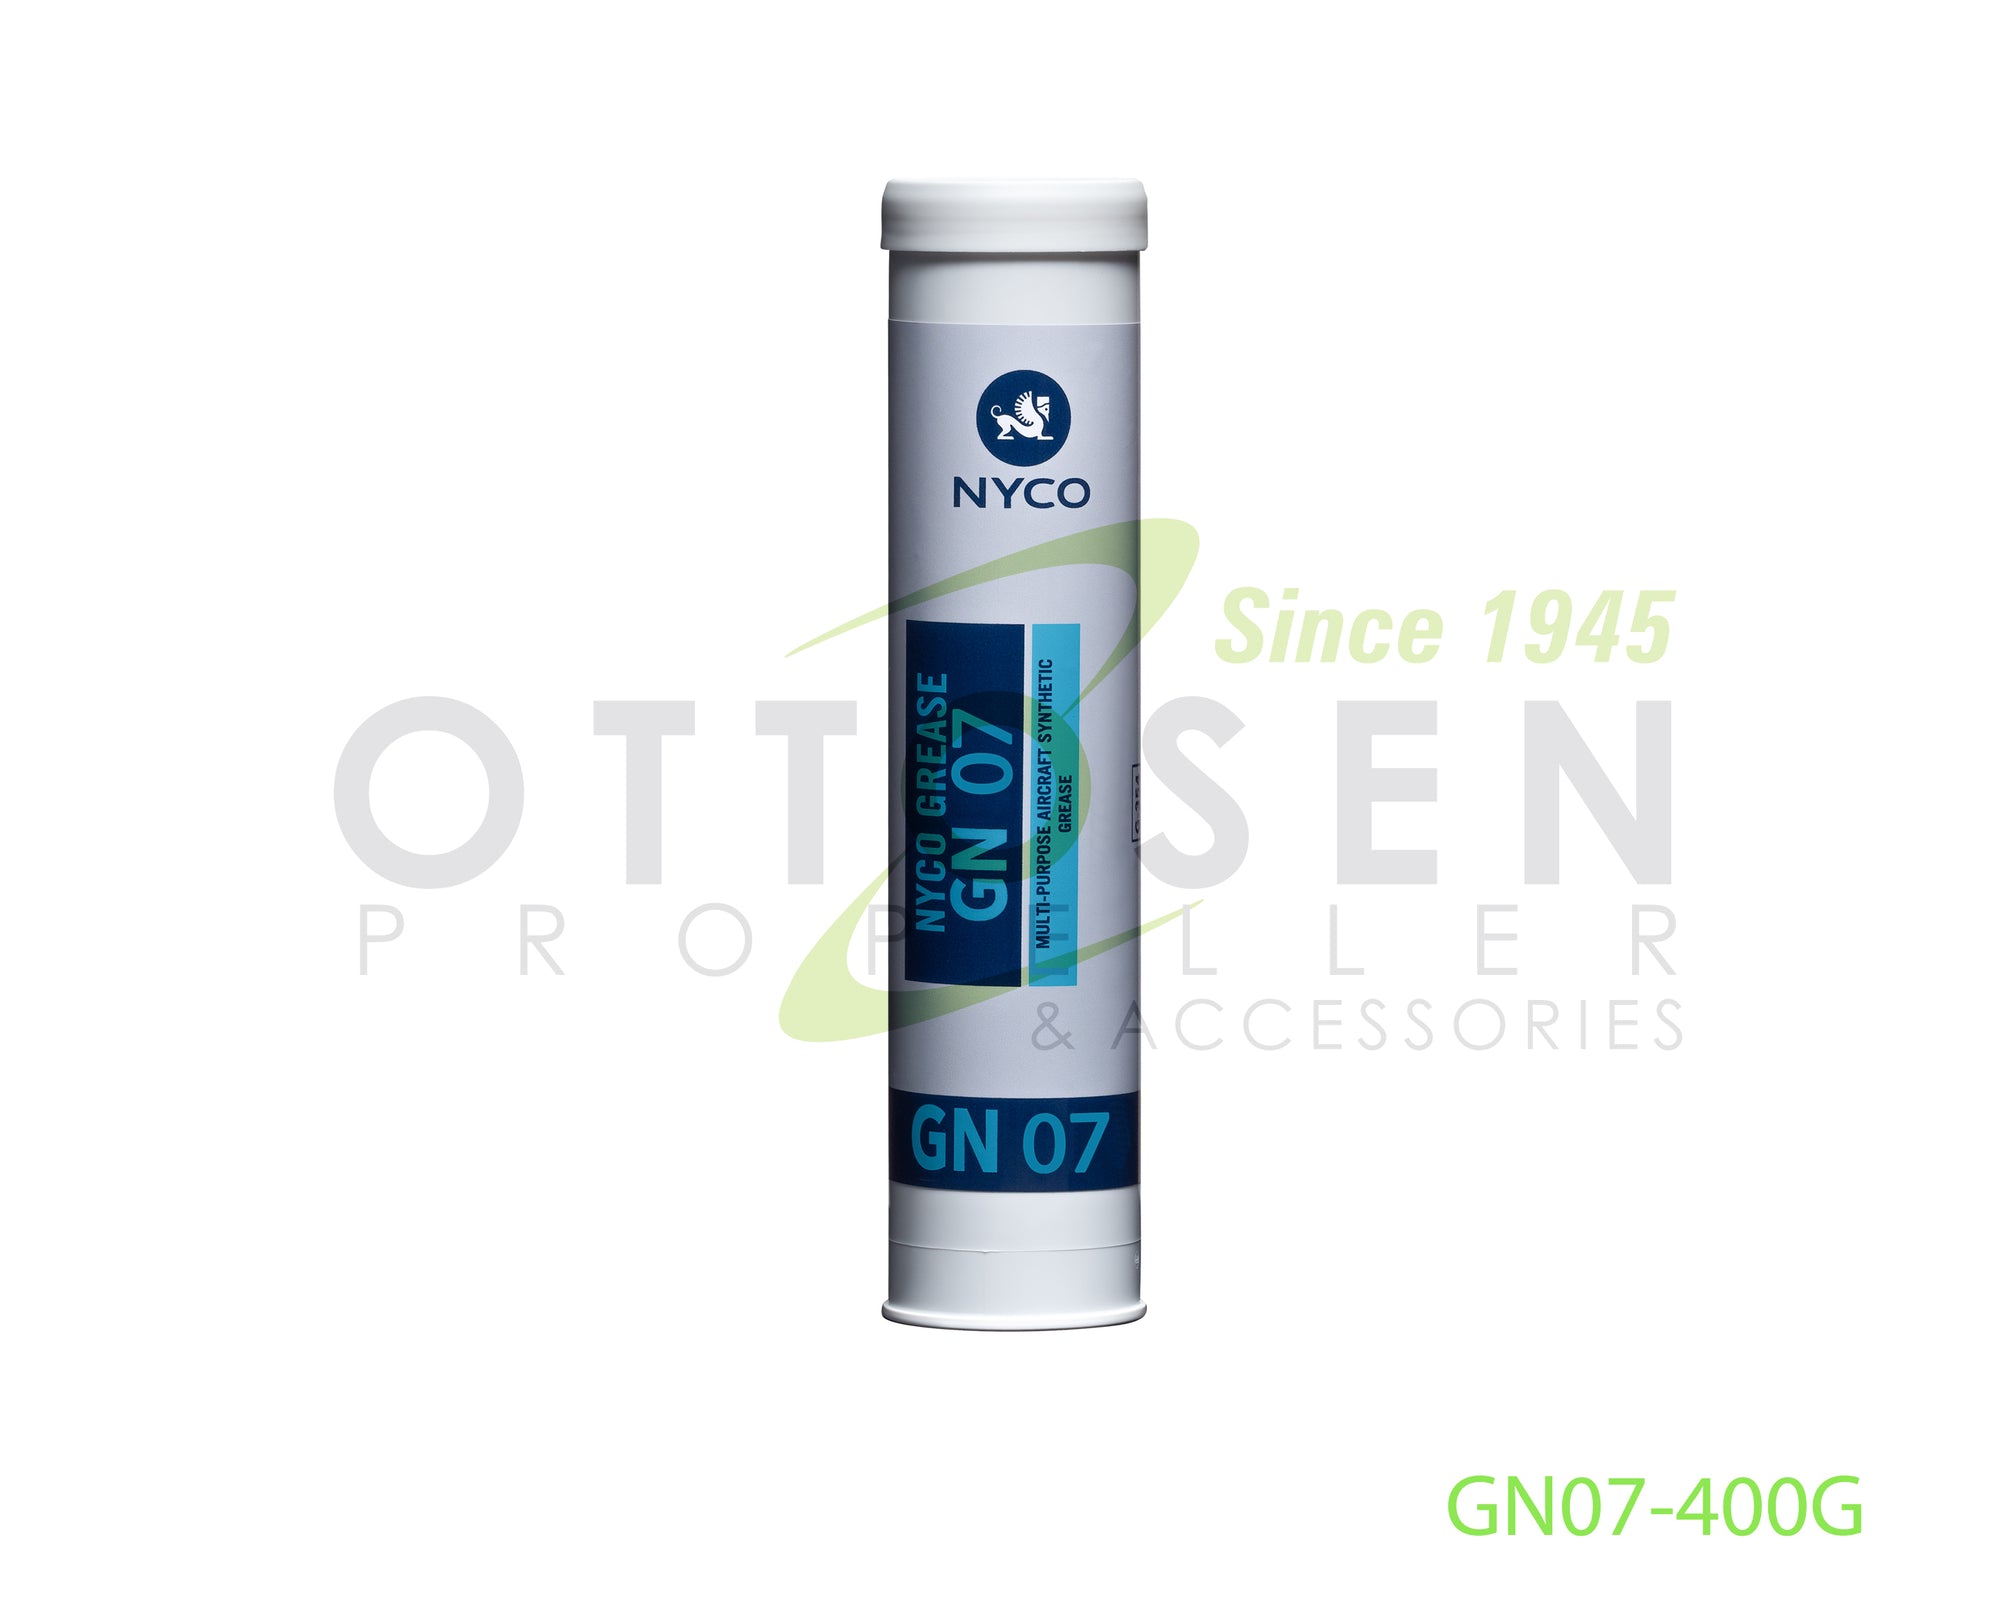 GN07-400G-NYCO-GREASE-PICTURE-1